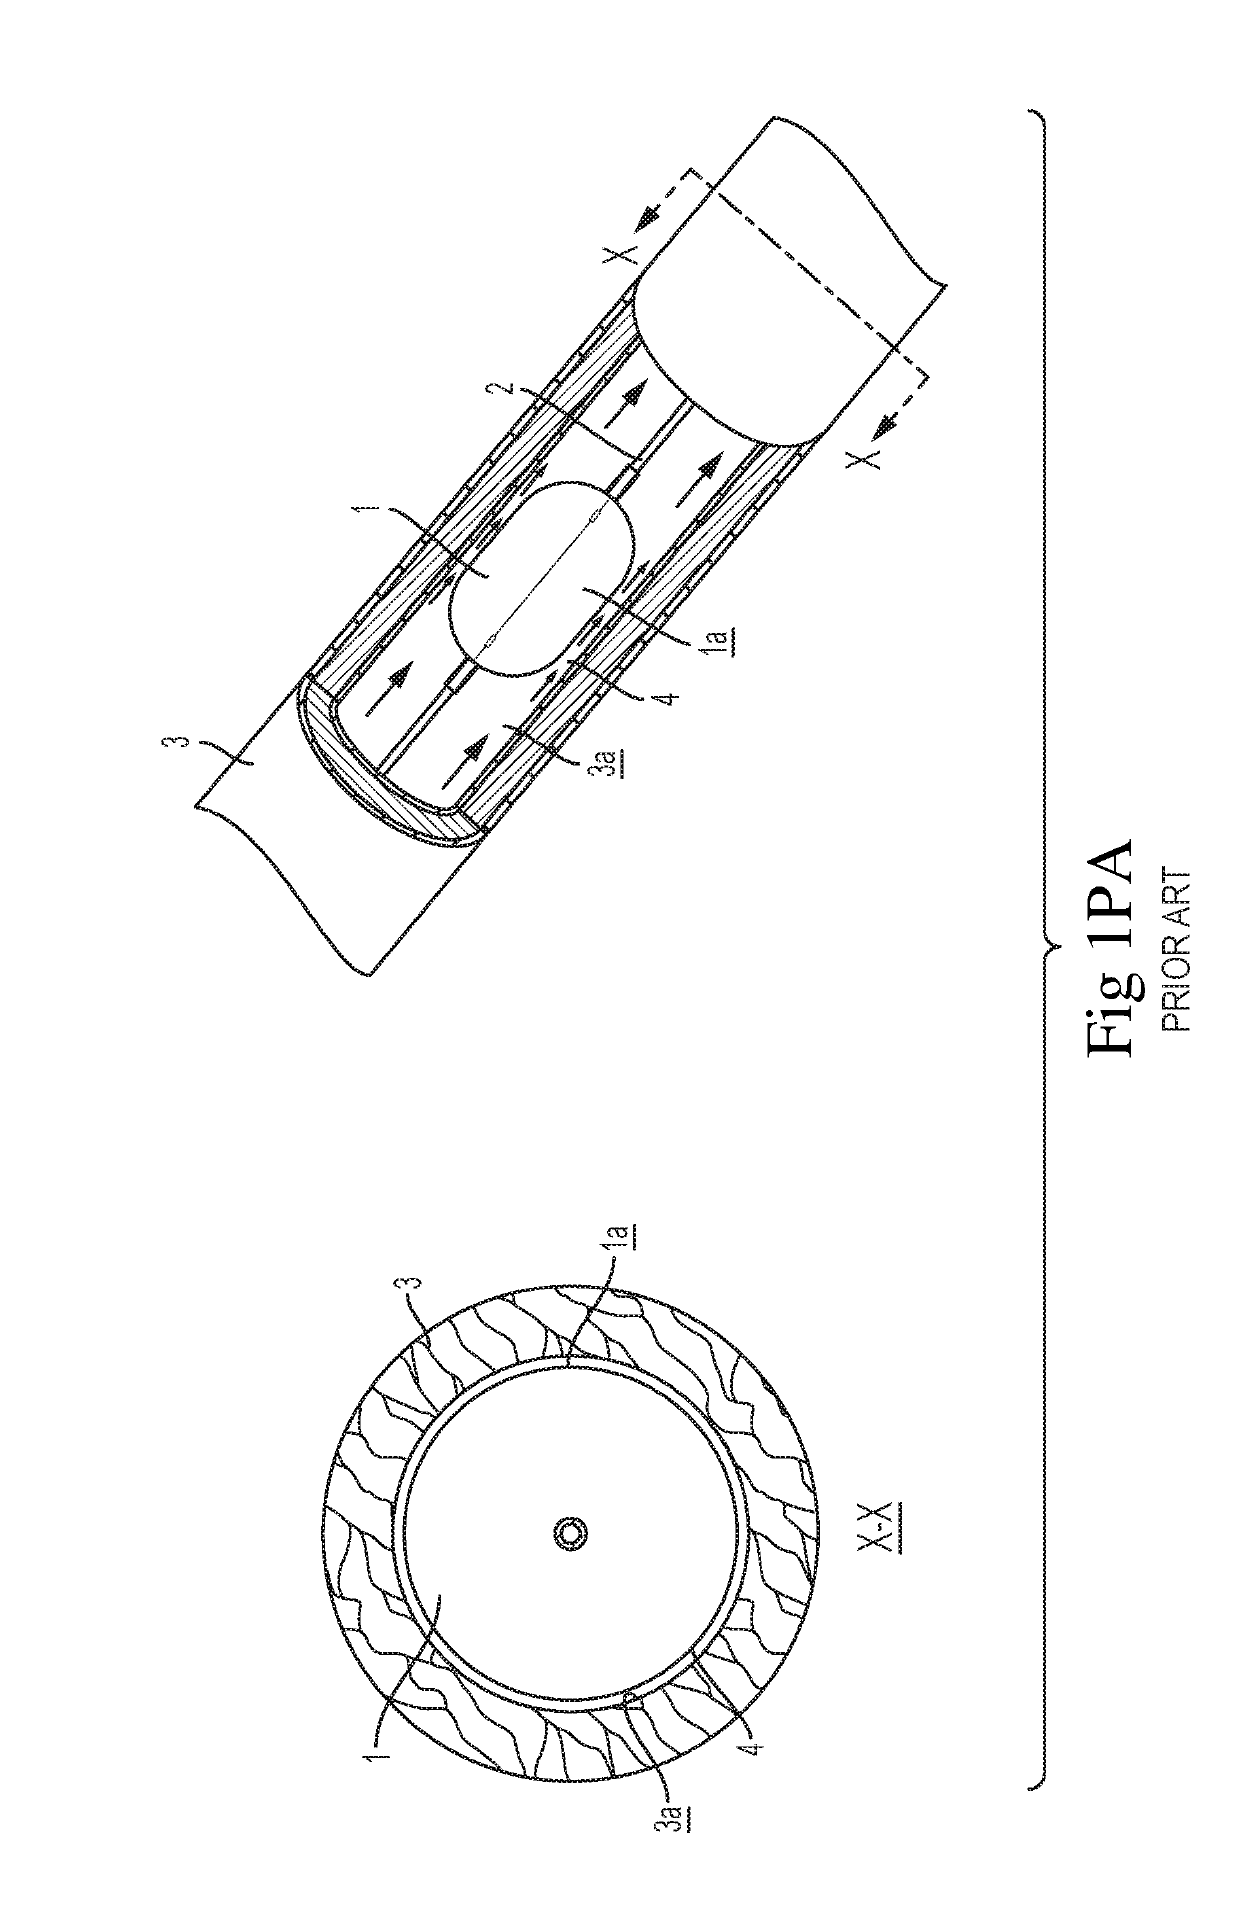 System and method for low profile occlusion balloon catheter